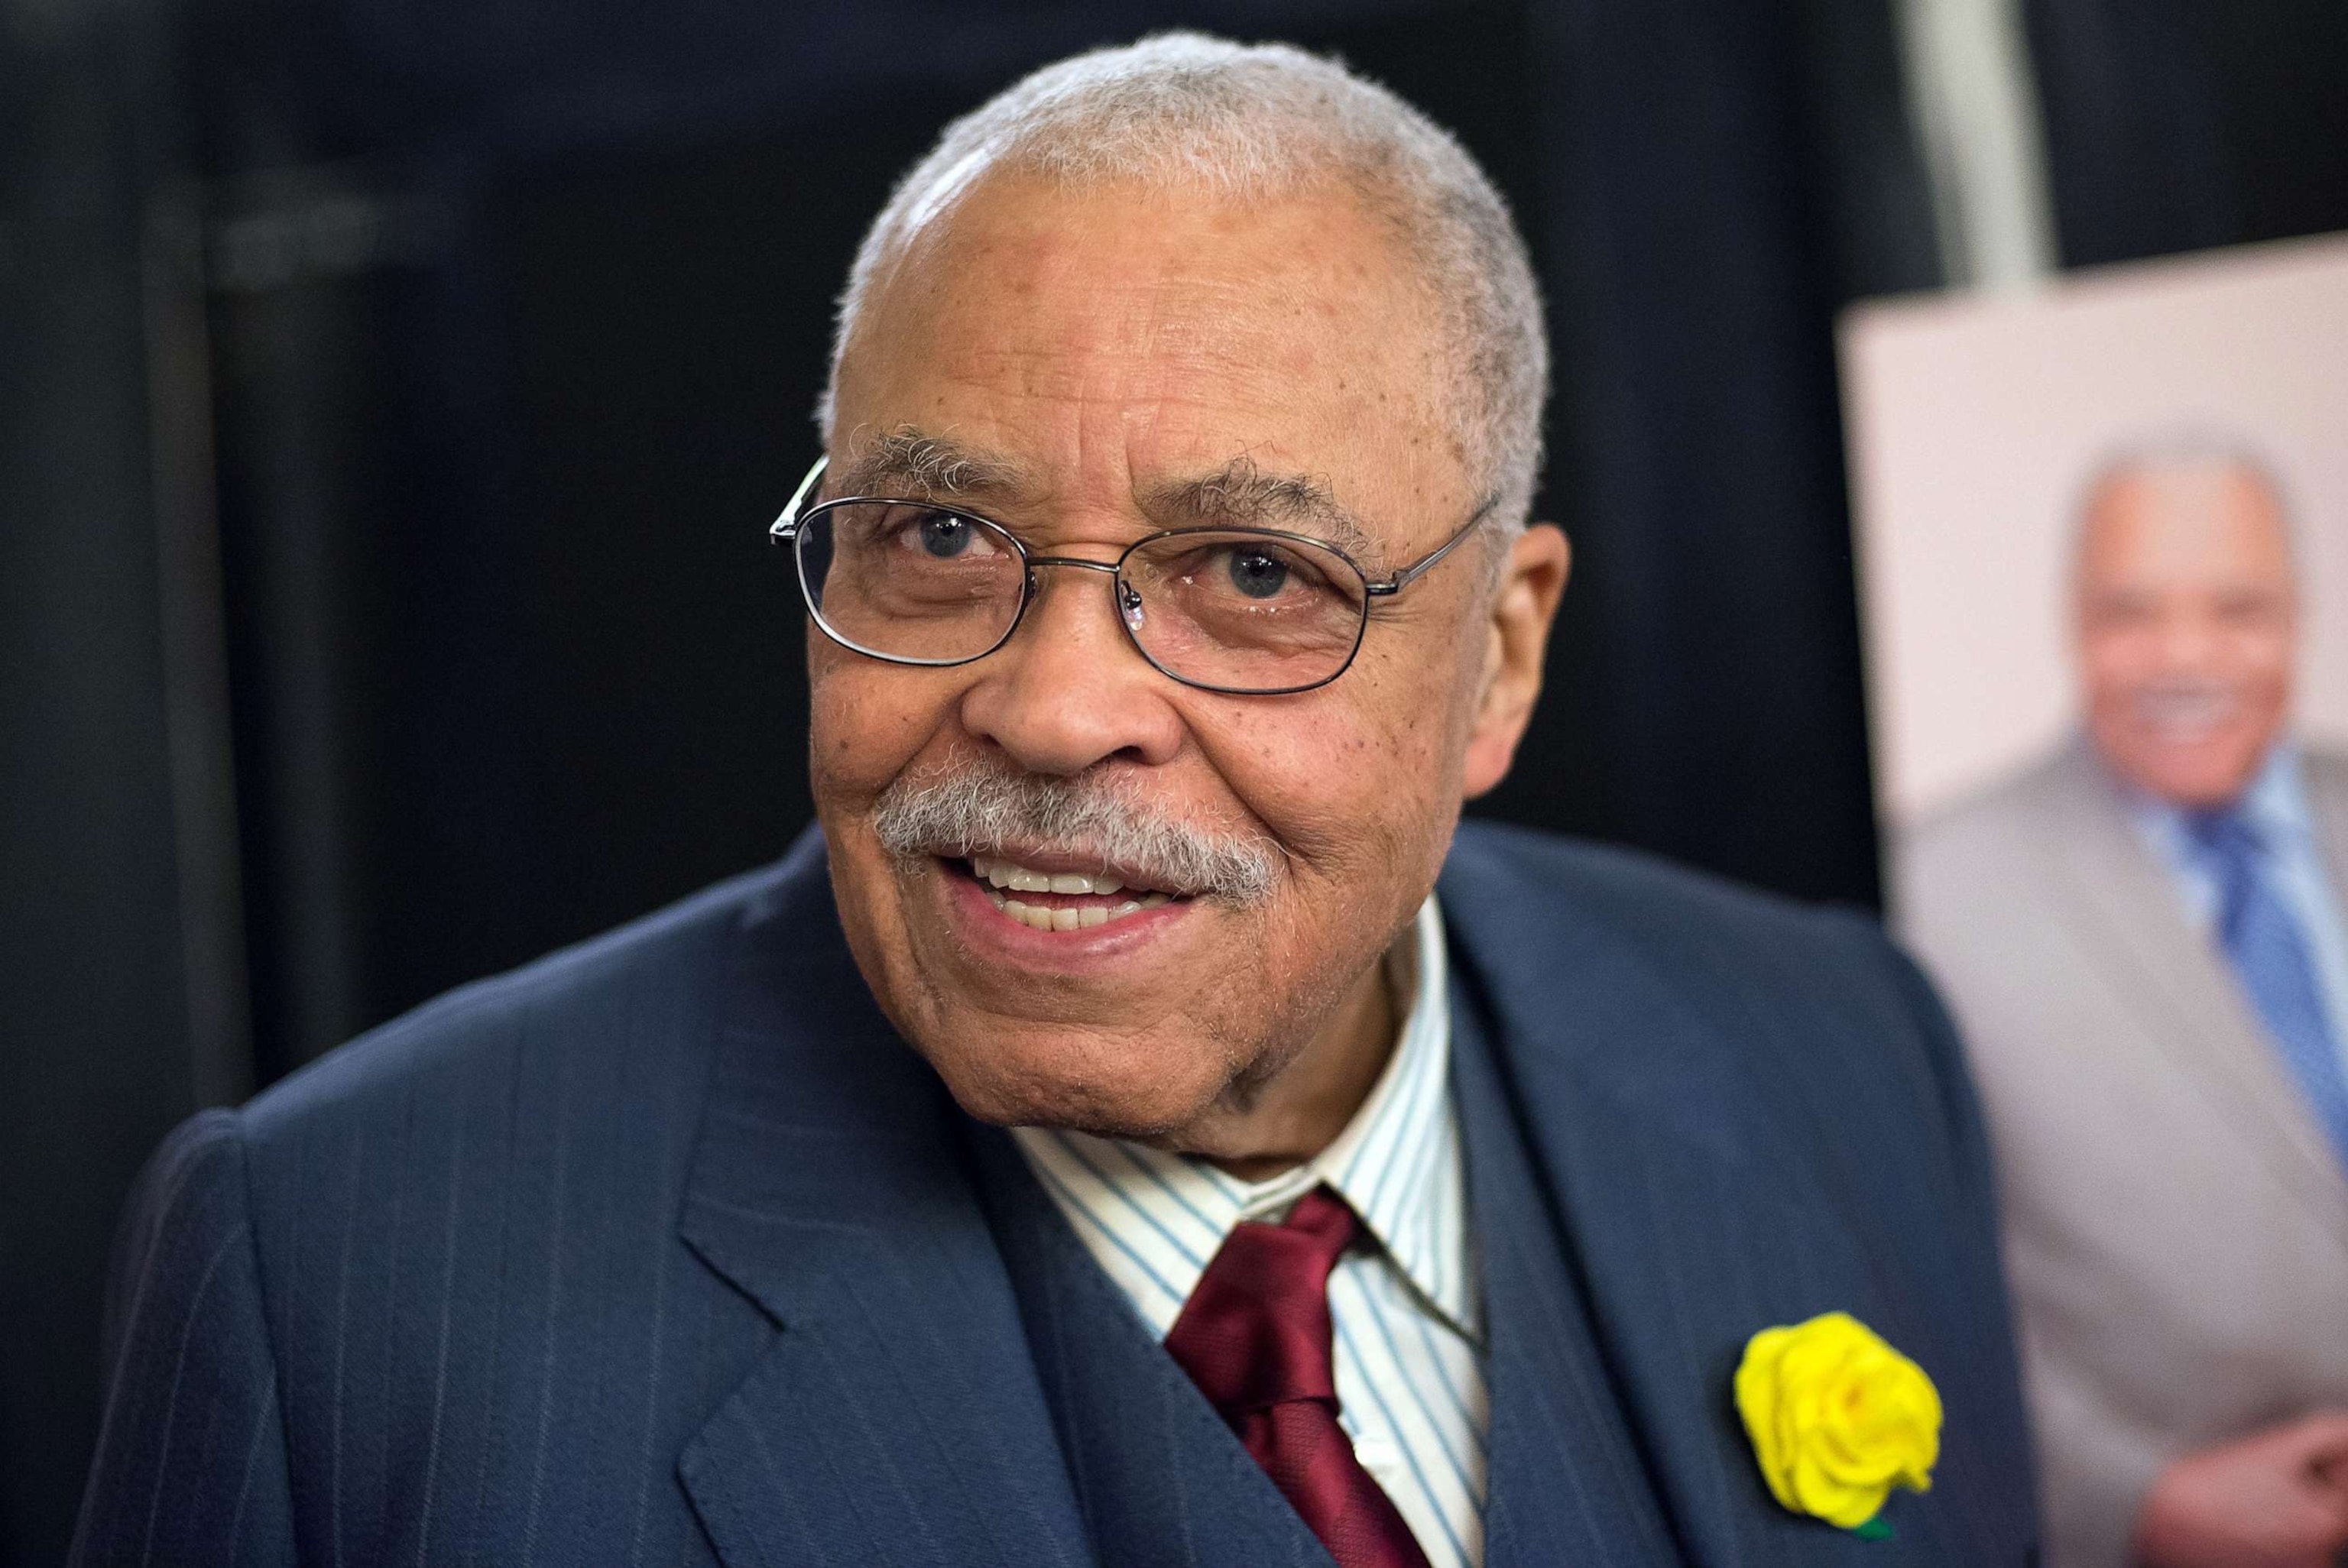 PHOTO: James Earl Jones attends "The Gin Game" Broadway opening night after party at Sardi's on October 14, 2015 in New York City.